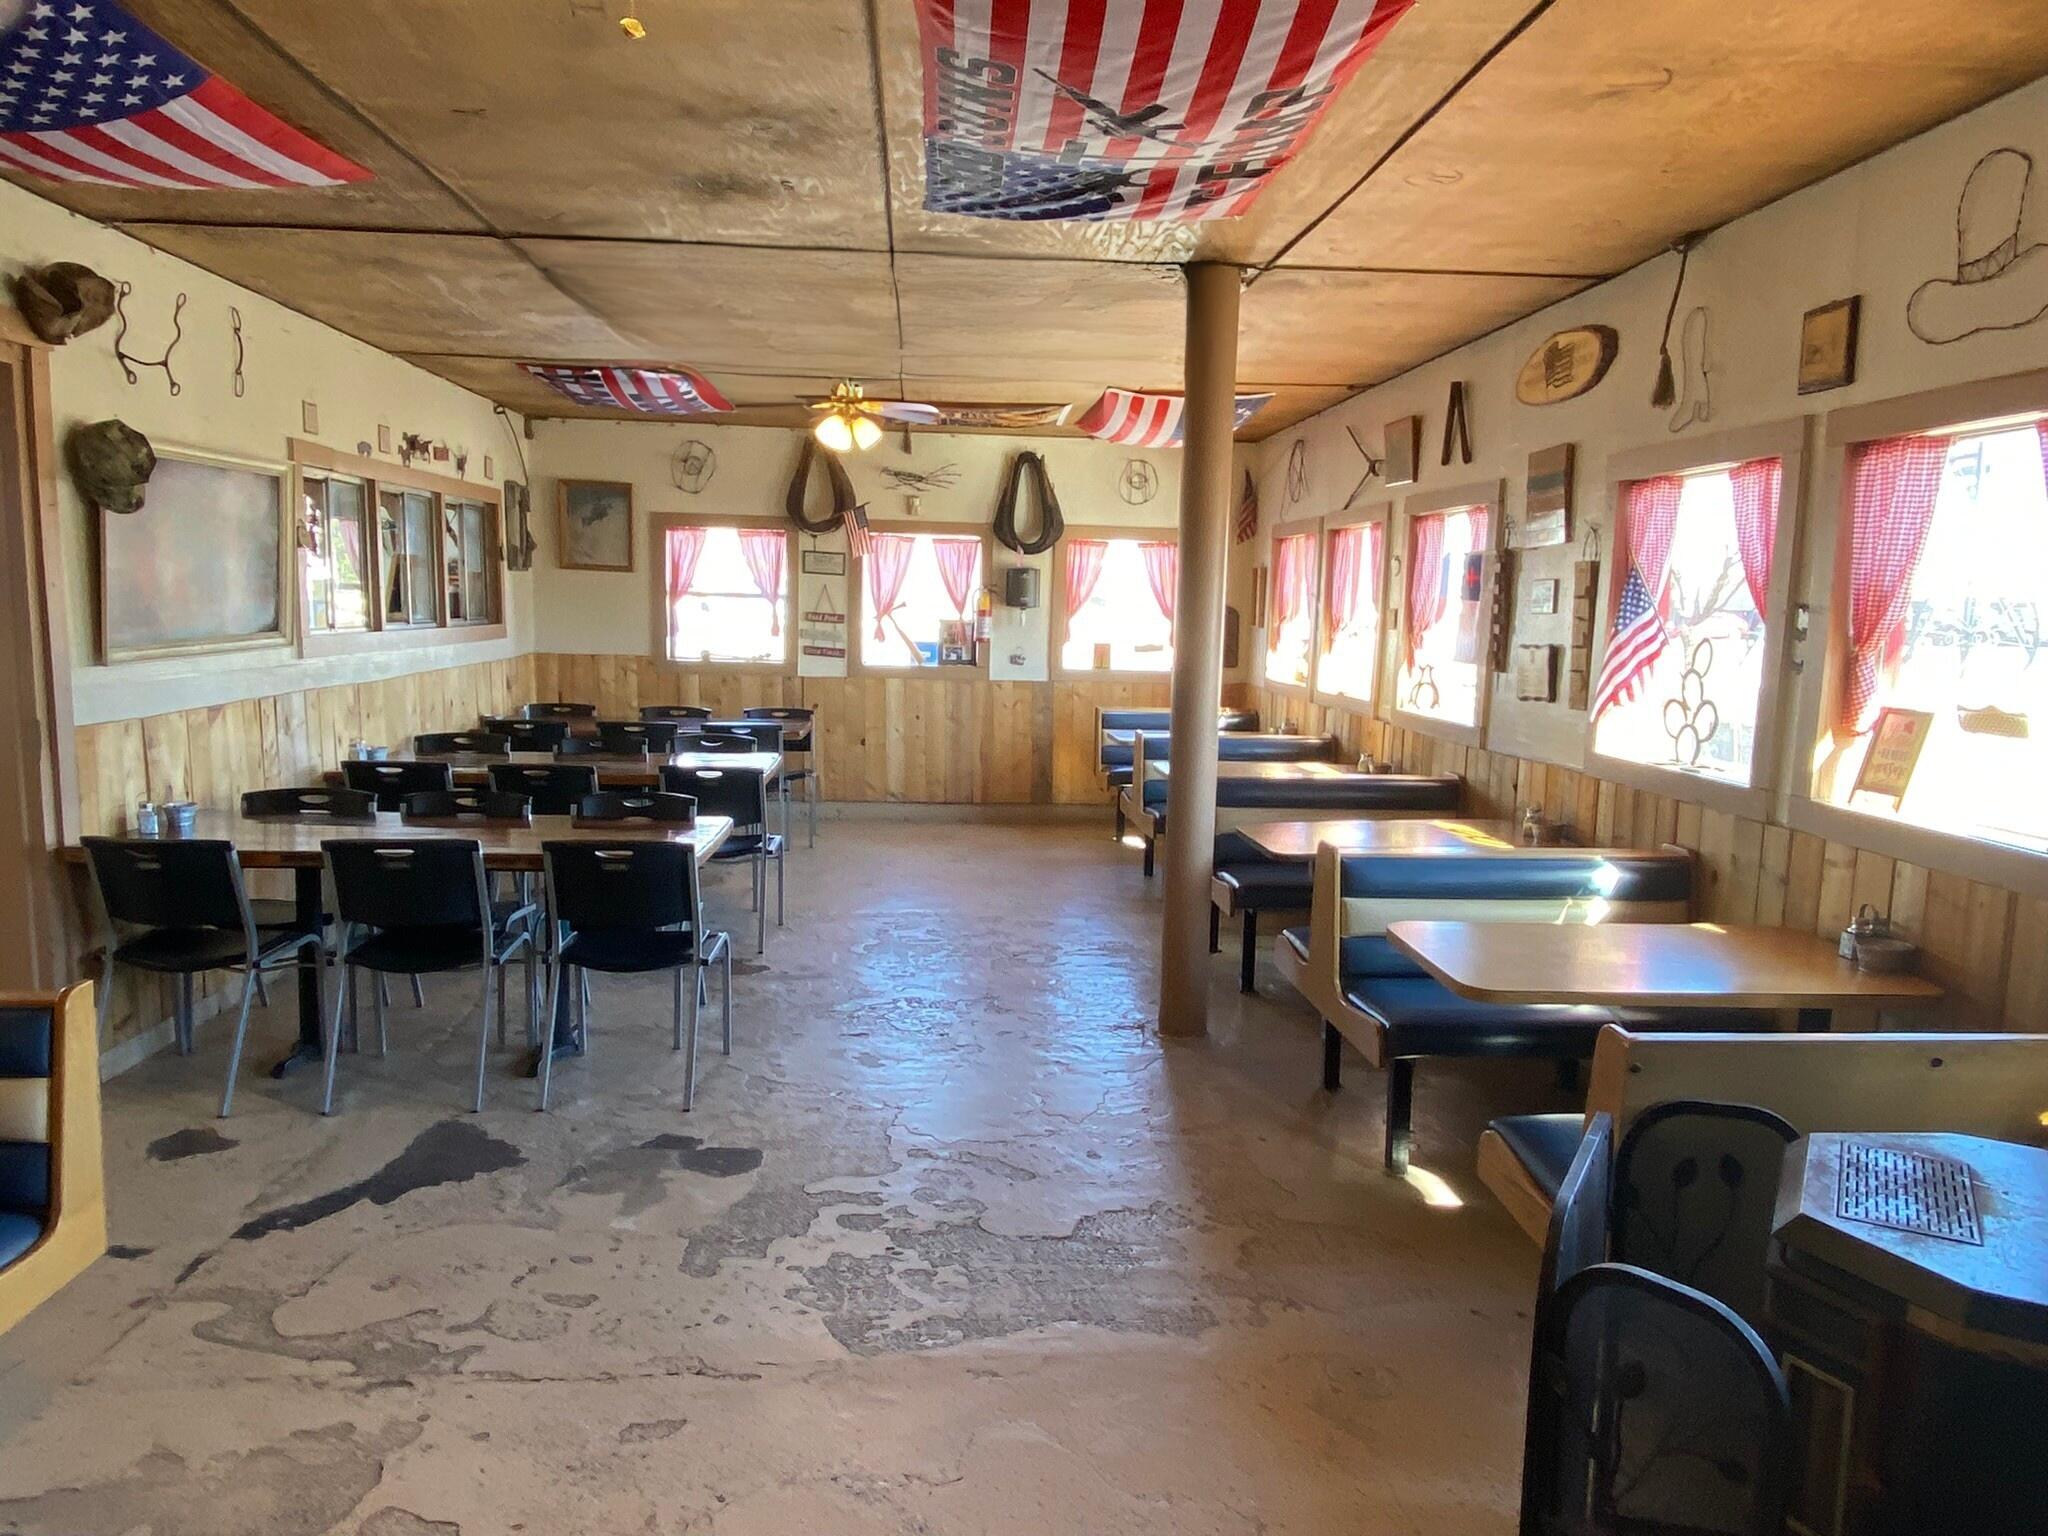 1202 W U.S. Route 66, Moriarty, New Mexico 87035, ,Commercial Sale,For Sale,1202 W U.S. Route 66,1057087